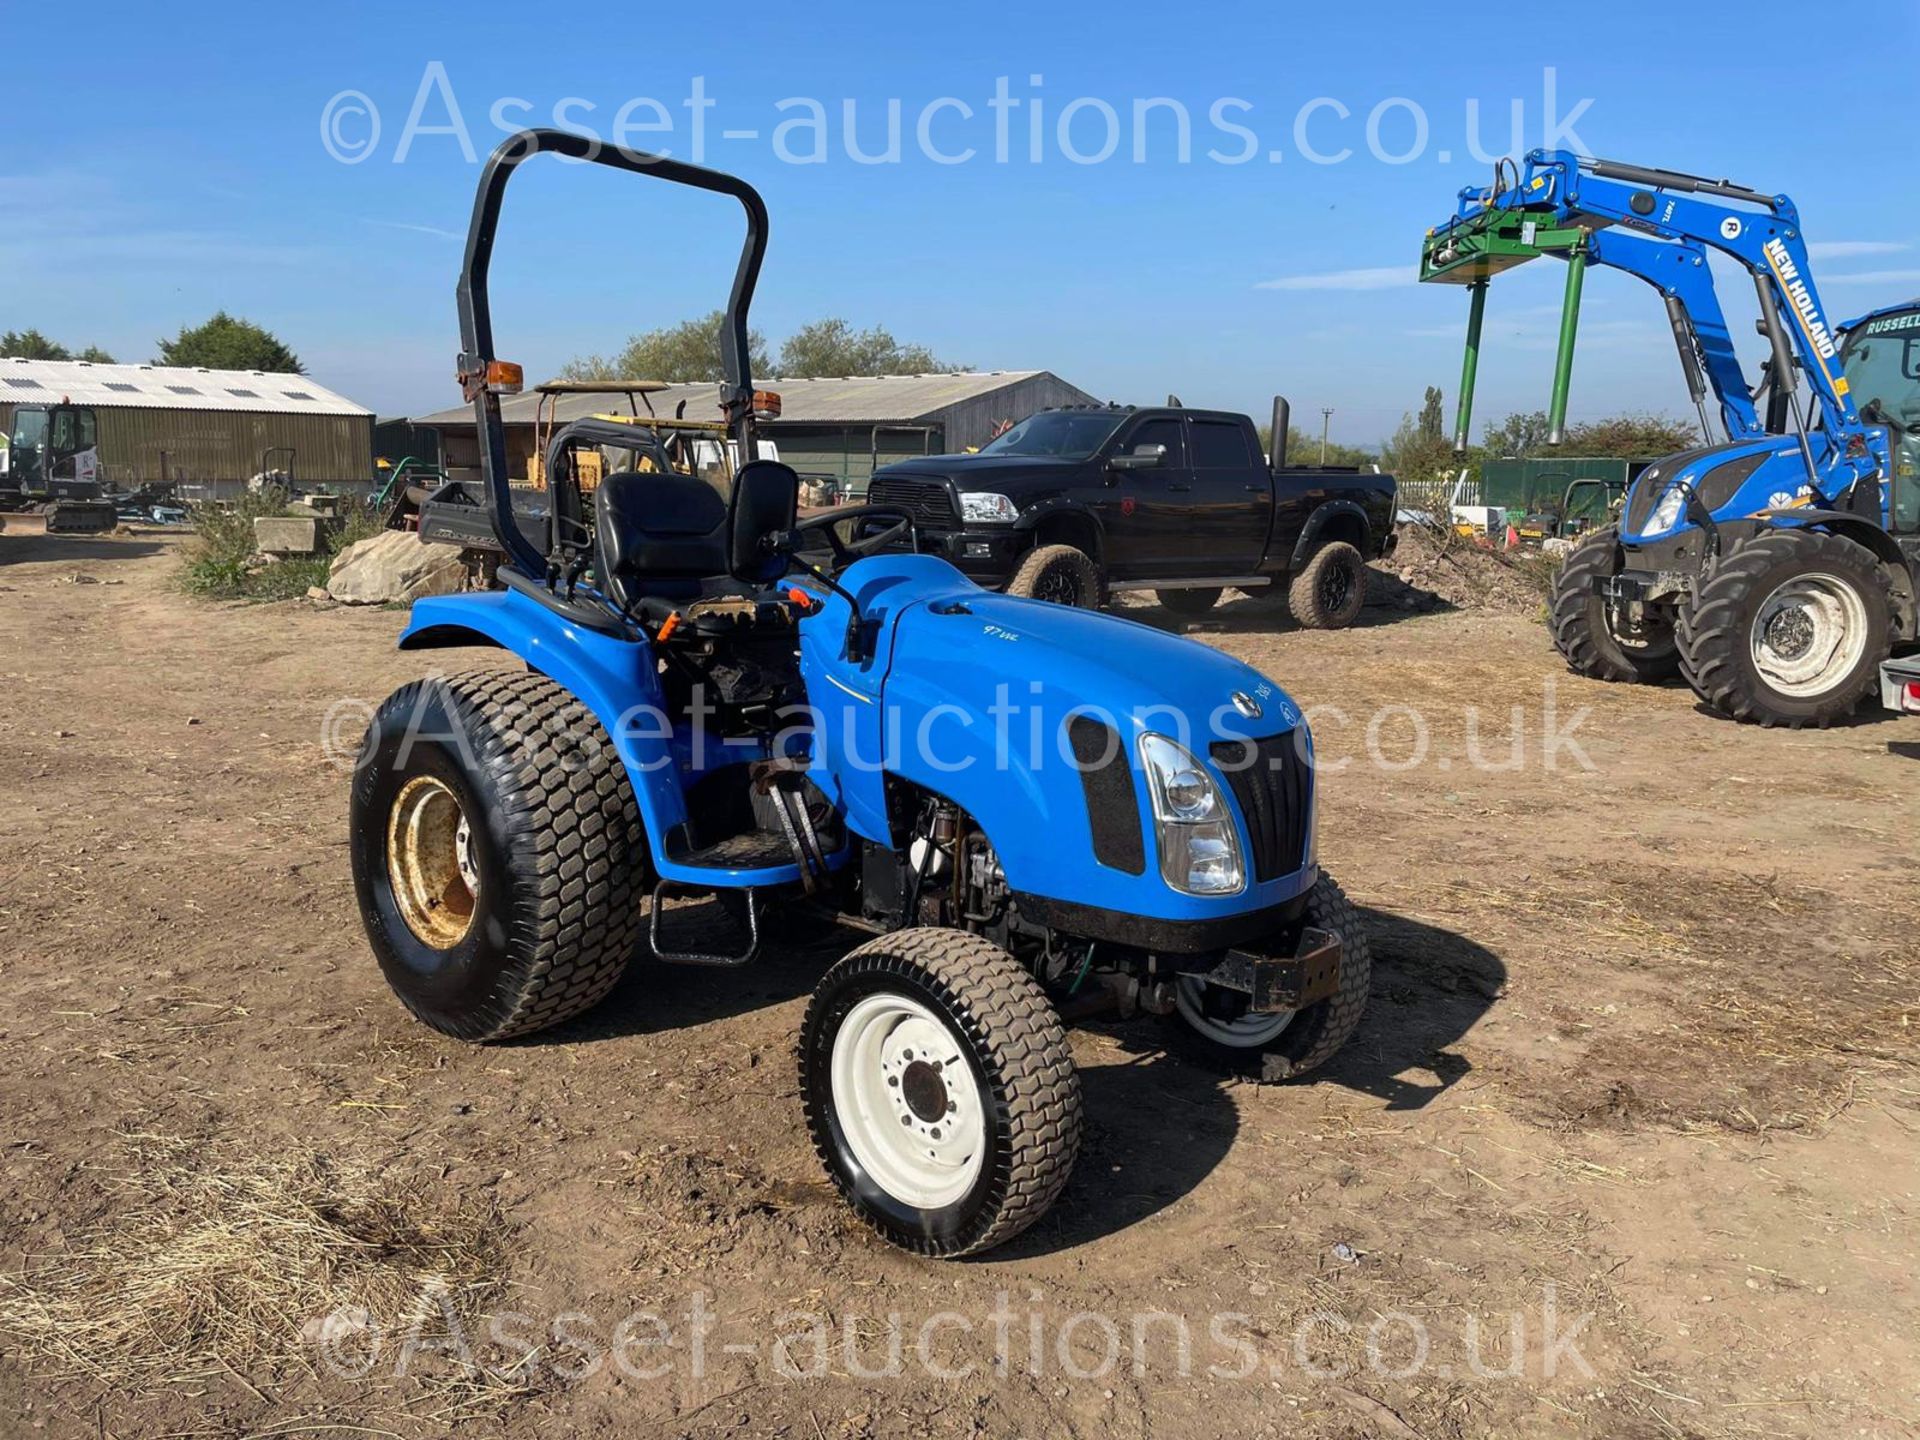 2005 NEW HOLLAND TC27DA 27hp 4WD COMPACT TRACTOR, RUNS DRIVES AND WORKS WELL, ROAD REGISTERED - Image 3 of 26